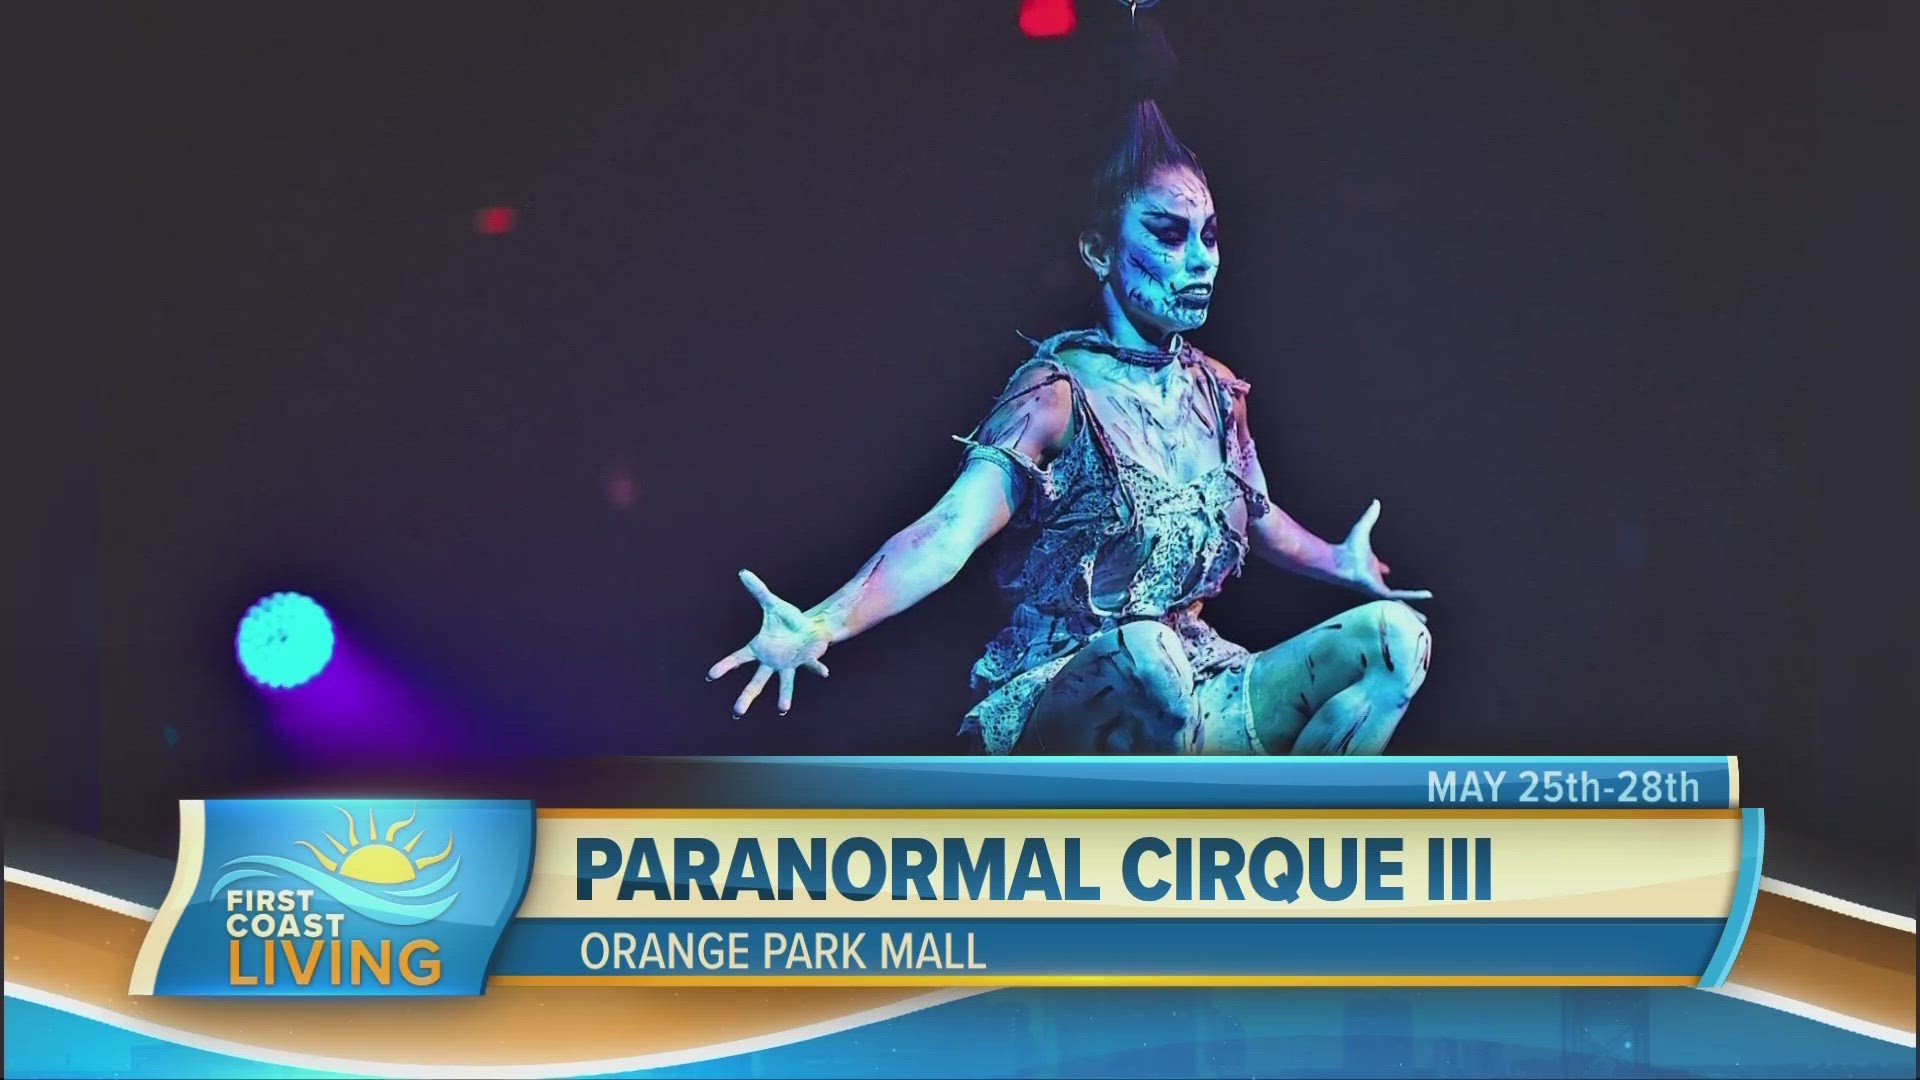 Paranormal Cirque III will at the Orange Park Mall May 25-28.